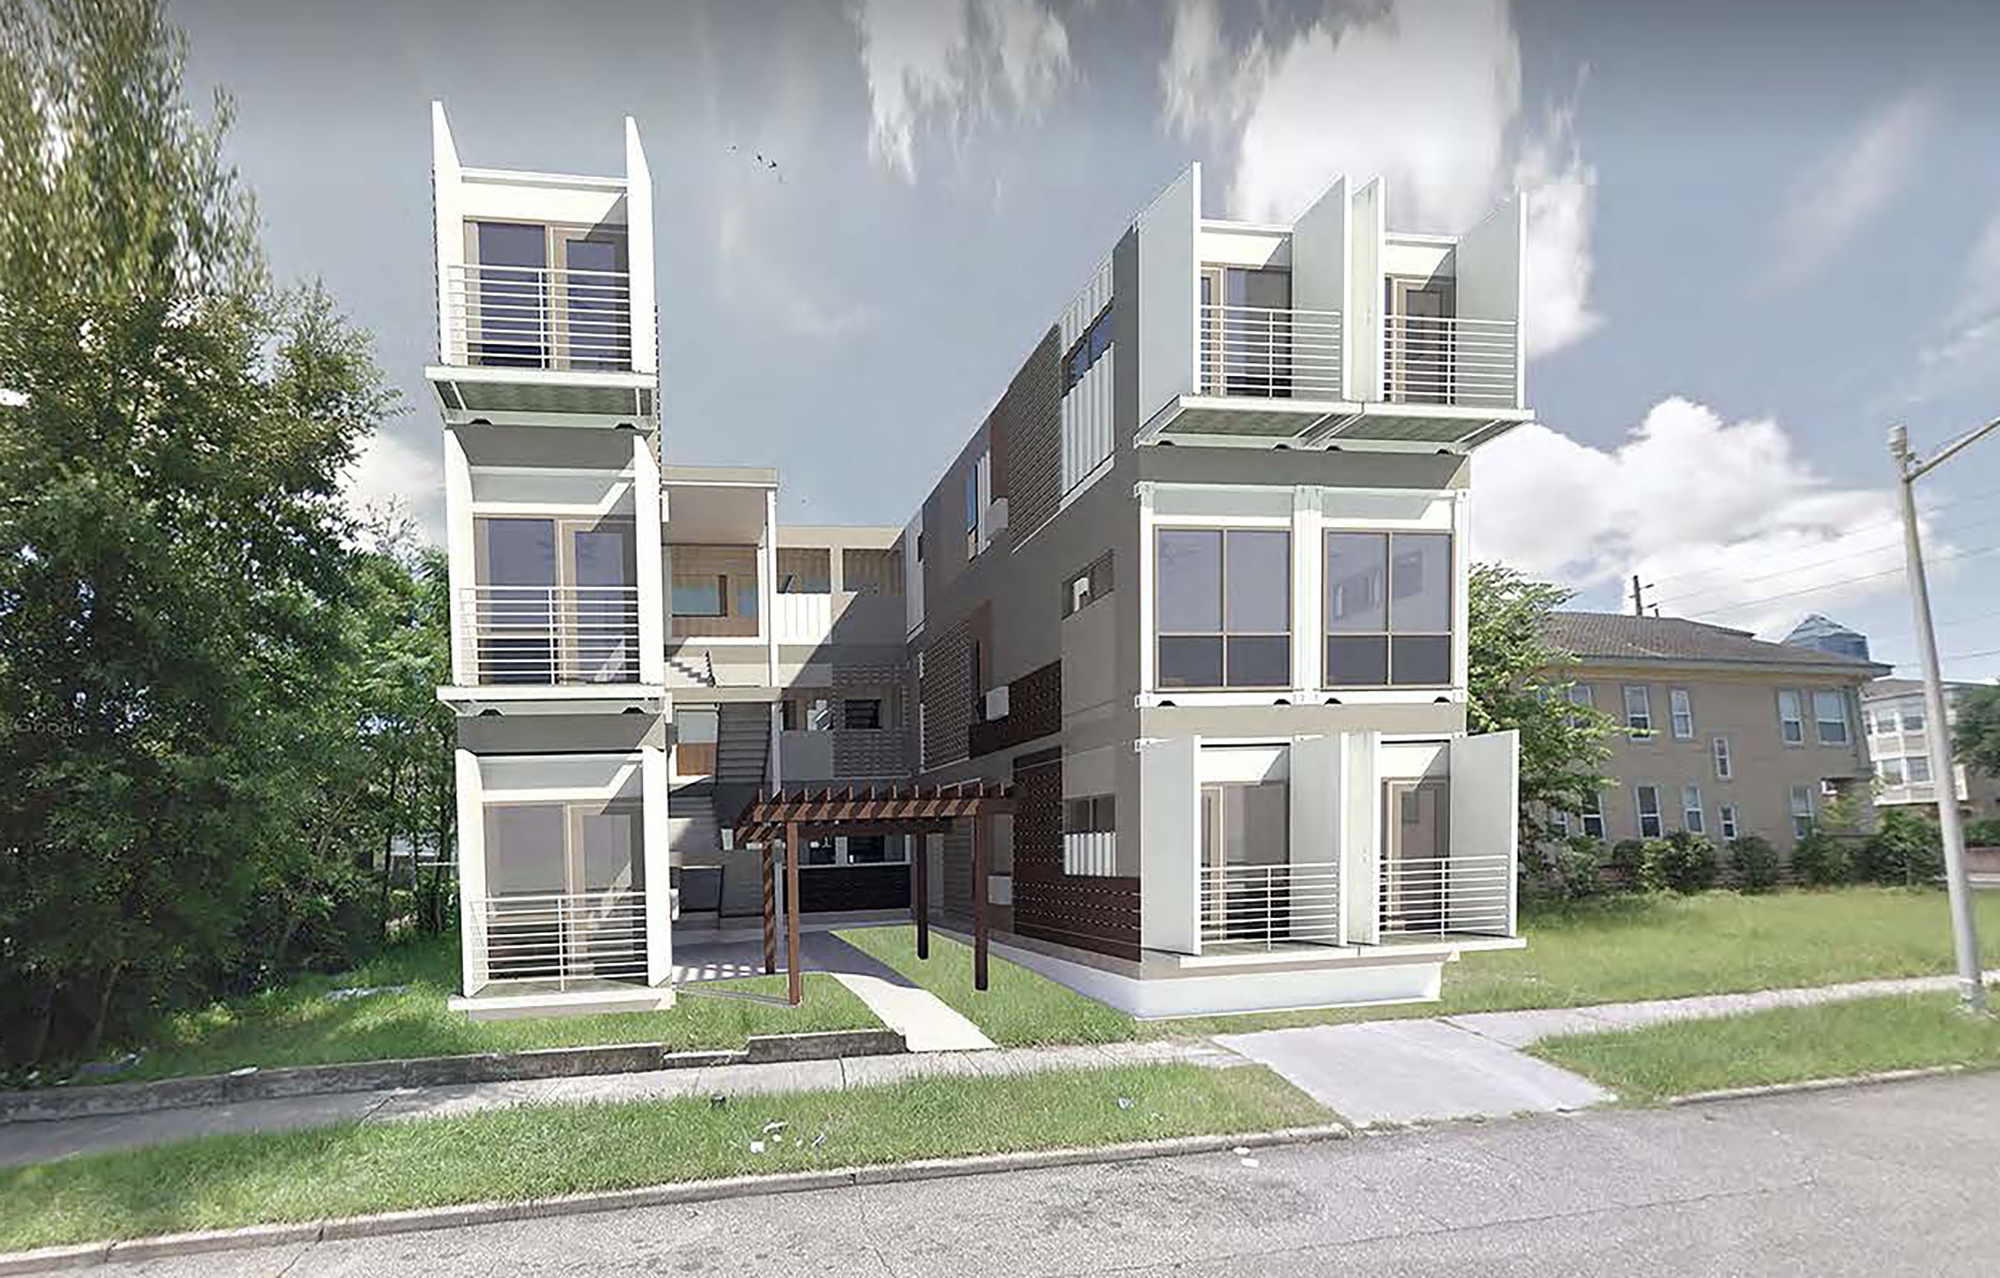 The Ashley Street Container Project is planned at 412 Ashley Street.